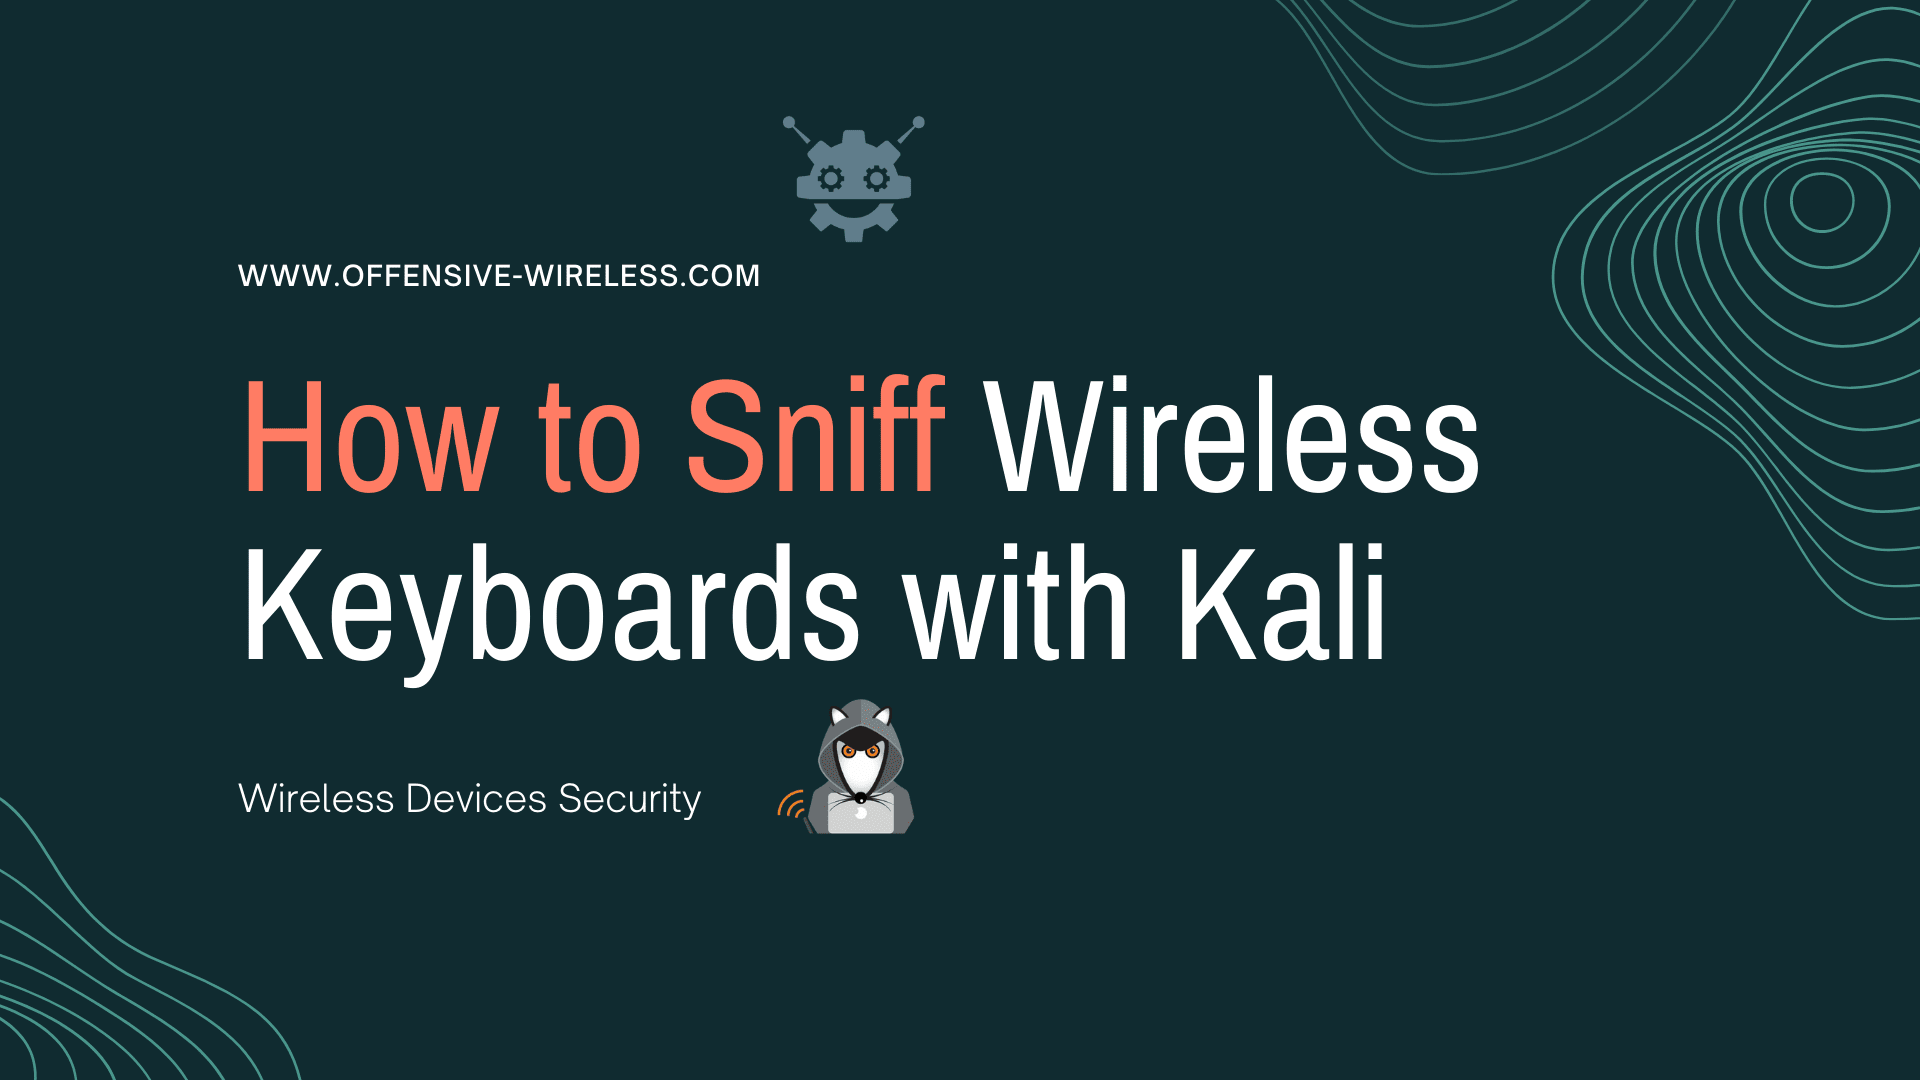 How to Sniff Wireless Keyboards easily with Crazy Radio 2